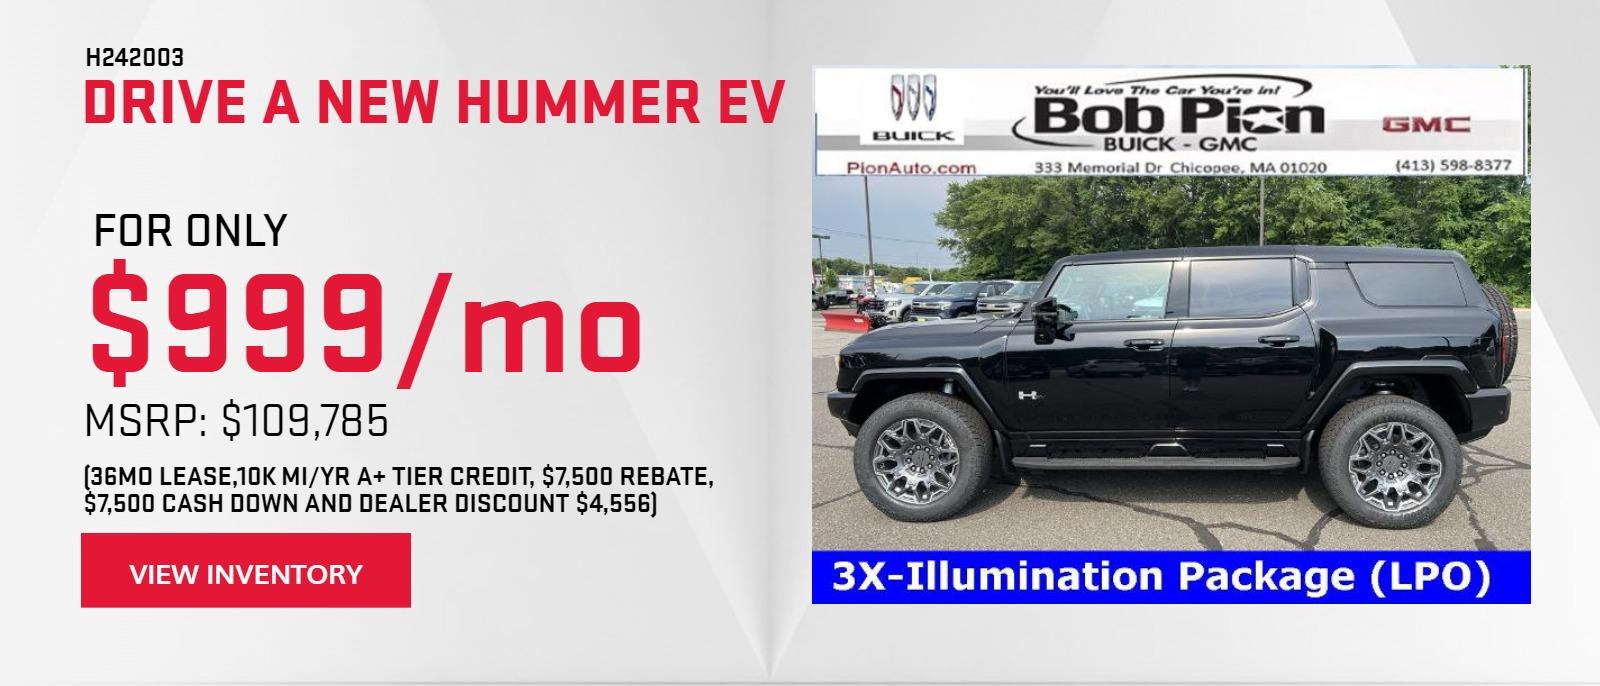 H242003 - Drive a New Hummer EV for only $999/mo! 
MSRP: $109,785!
(36mo Lease,10k mi/yr A+ Tier Credit, $7,500 Rebate, $7,500 cash down and Dealer Discount $4,556)